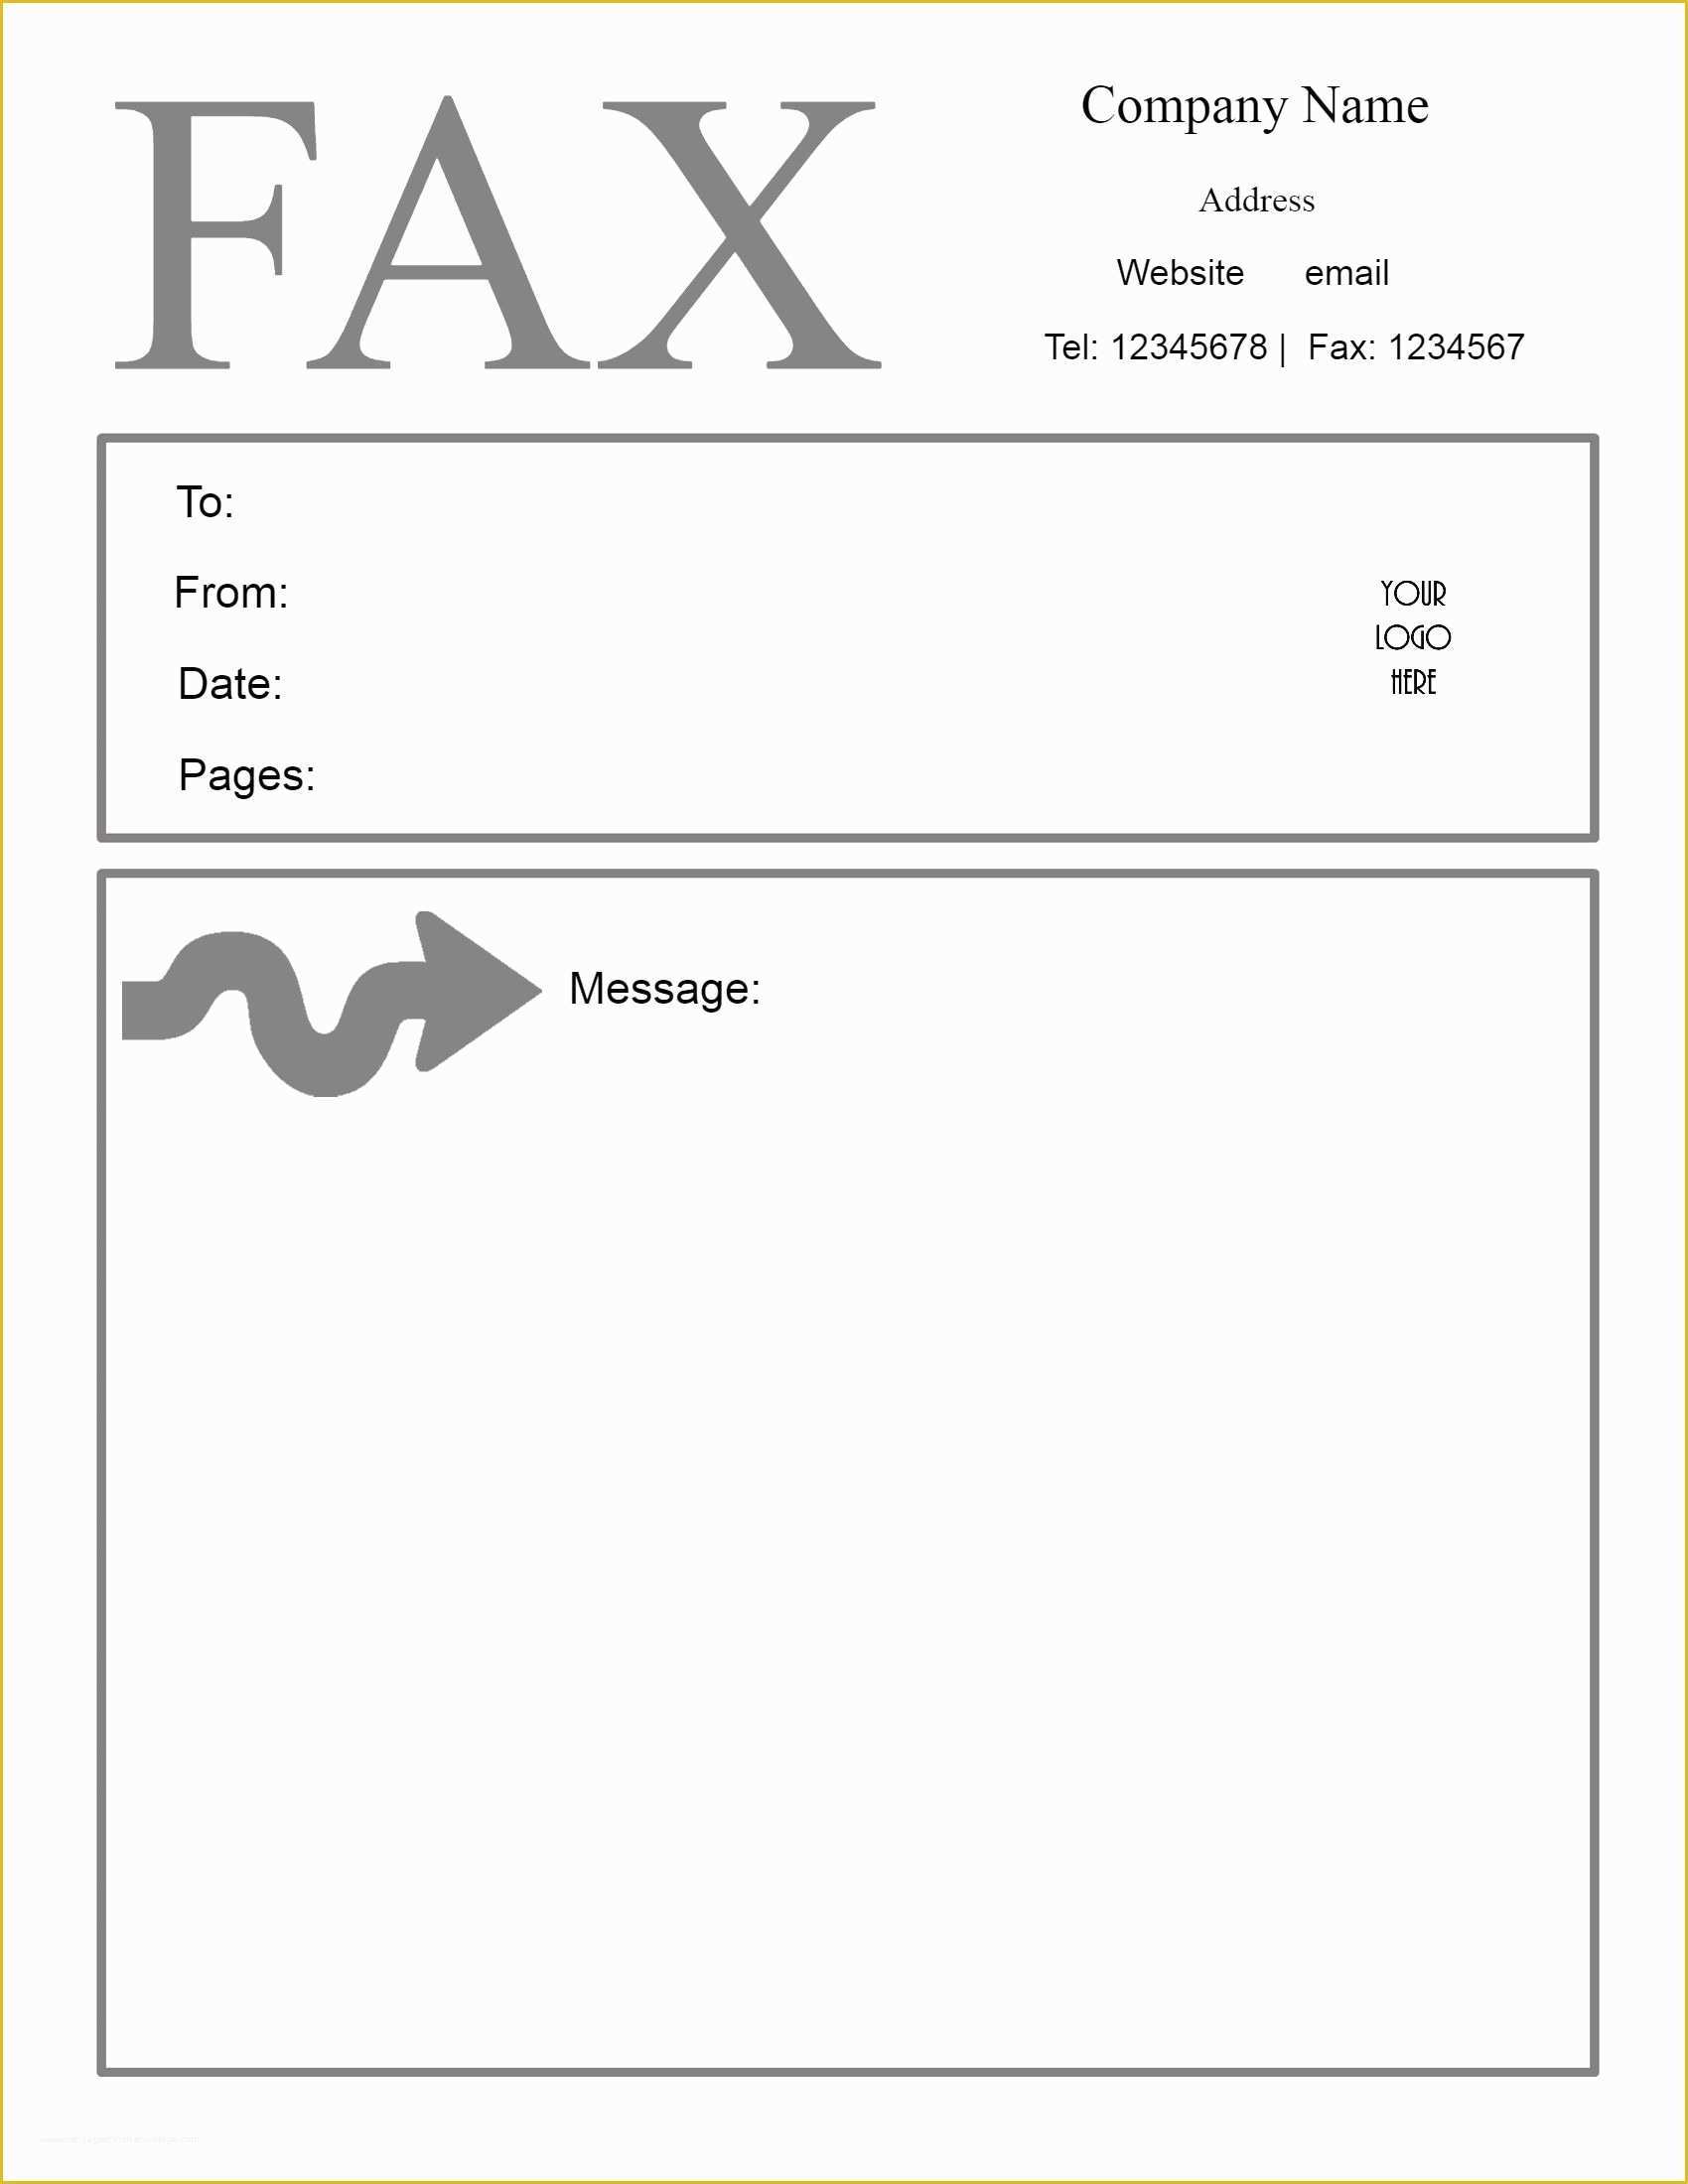 Fax Cover Sheet Template Free Of Free Fax Cover Sheet Template